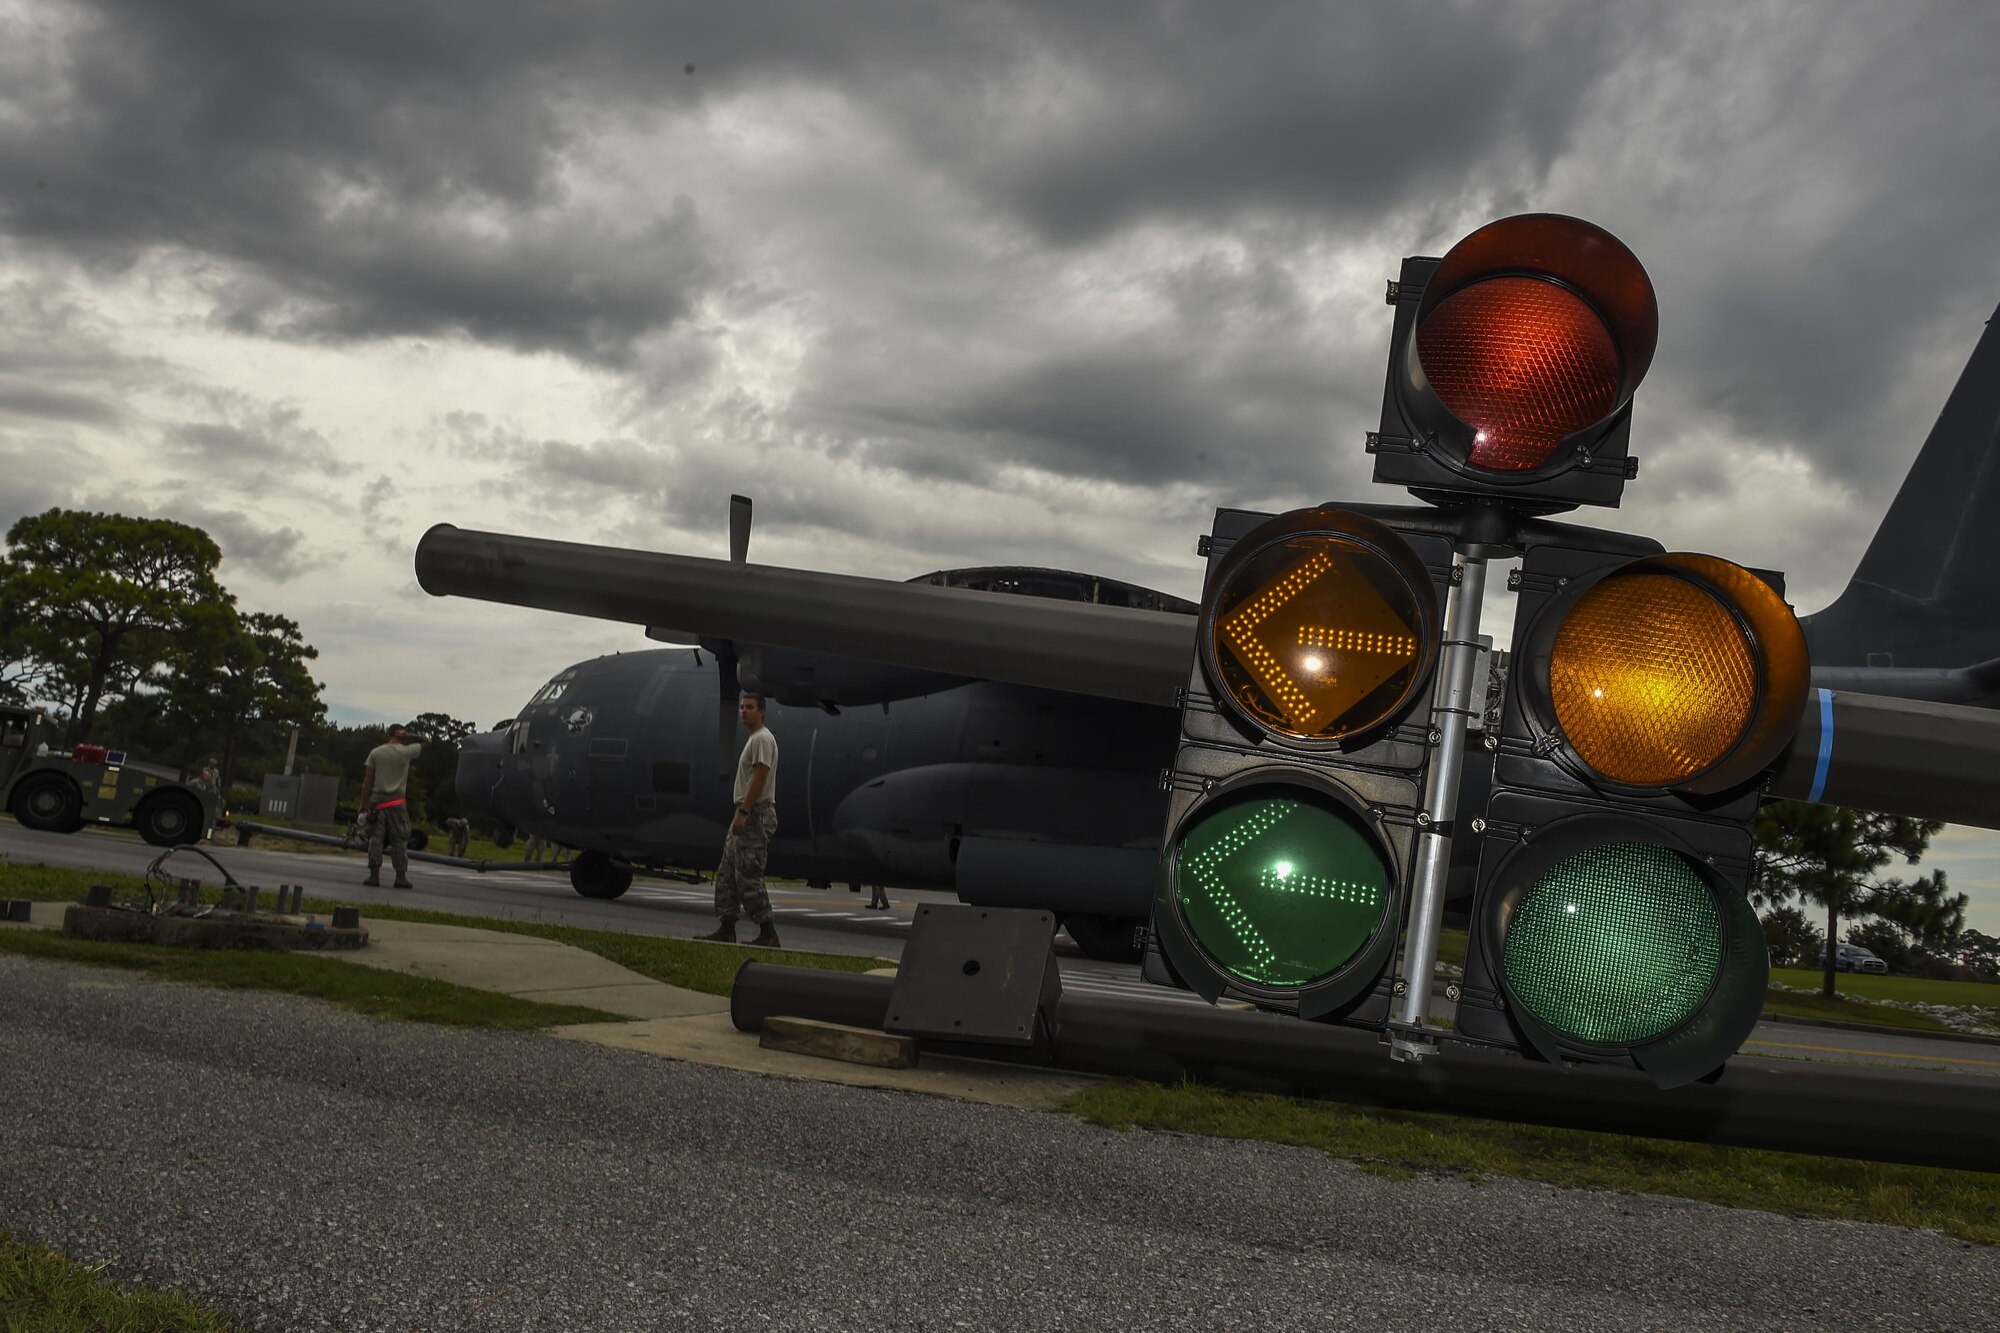 An MC-130P Combat Shadow is towed down Independence Road, Aug. 15, 2015, on Hurlburt Field, Fla. The Combat Shadow was towed from the flightline and staged for installation in the Hurlburt Field Air Park. The MC-130P fleet was retired May 15, 2015, after more than 25 years of service. The installation process for this aircraft known as “Team Shadow,” is scheduled for completion by Sept. 6, 2015. (U.S. Air Force photo by Airman 1st Class Ryan Conroy/Released)
